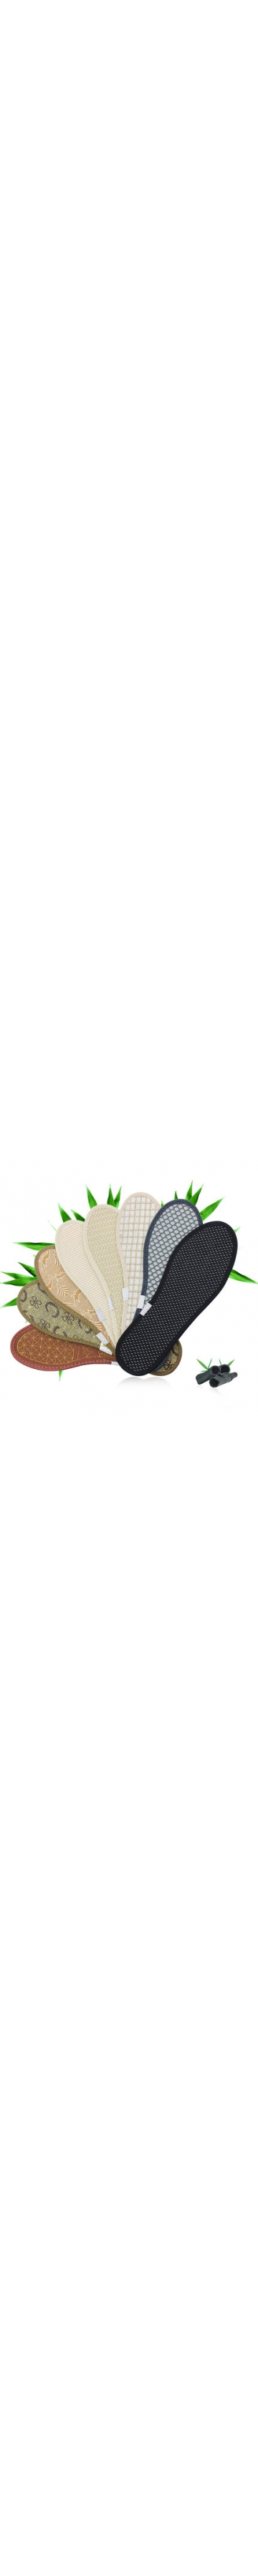 Bamboo charcoal insoles02